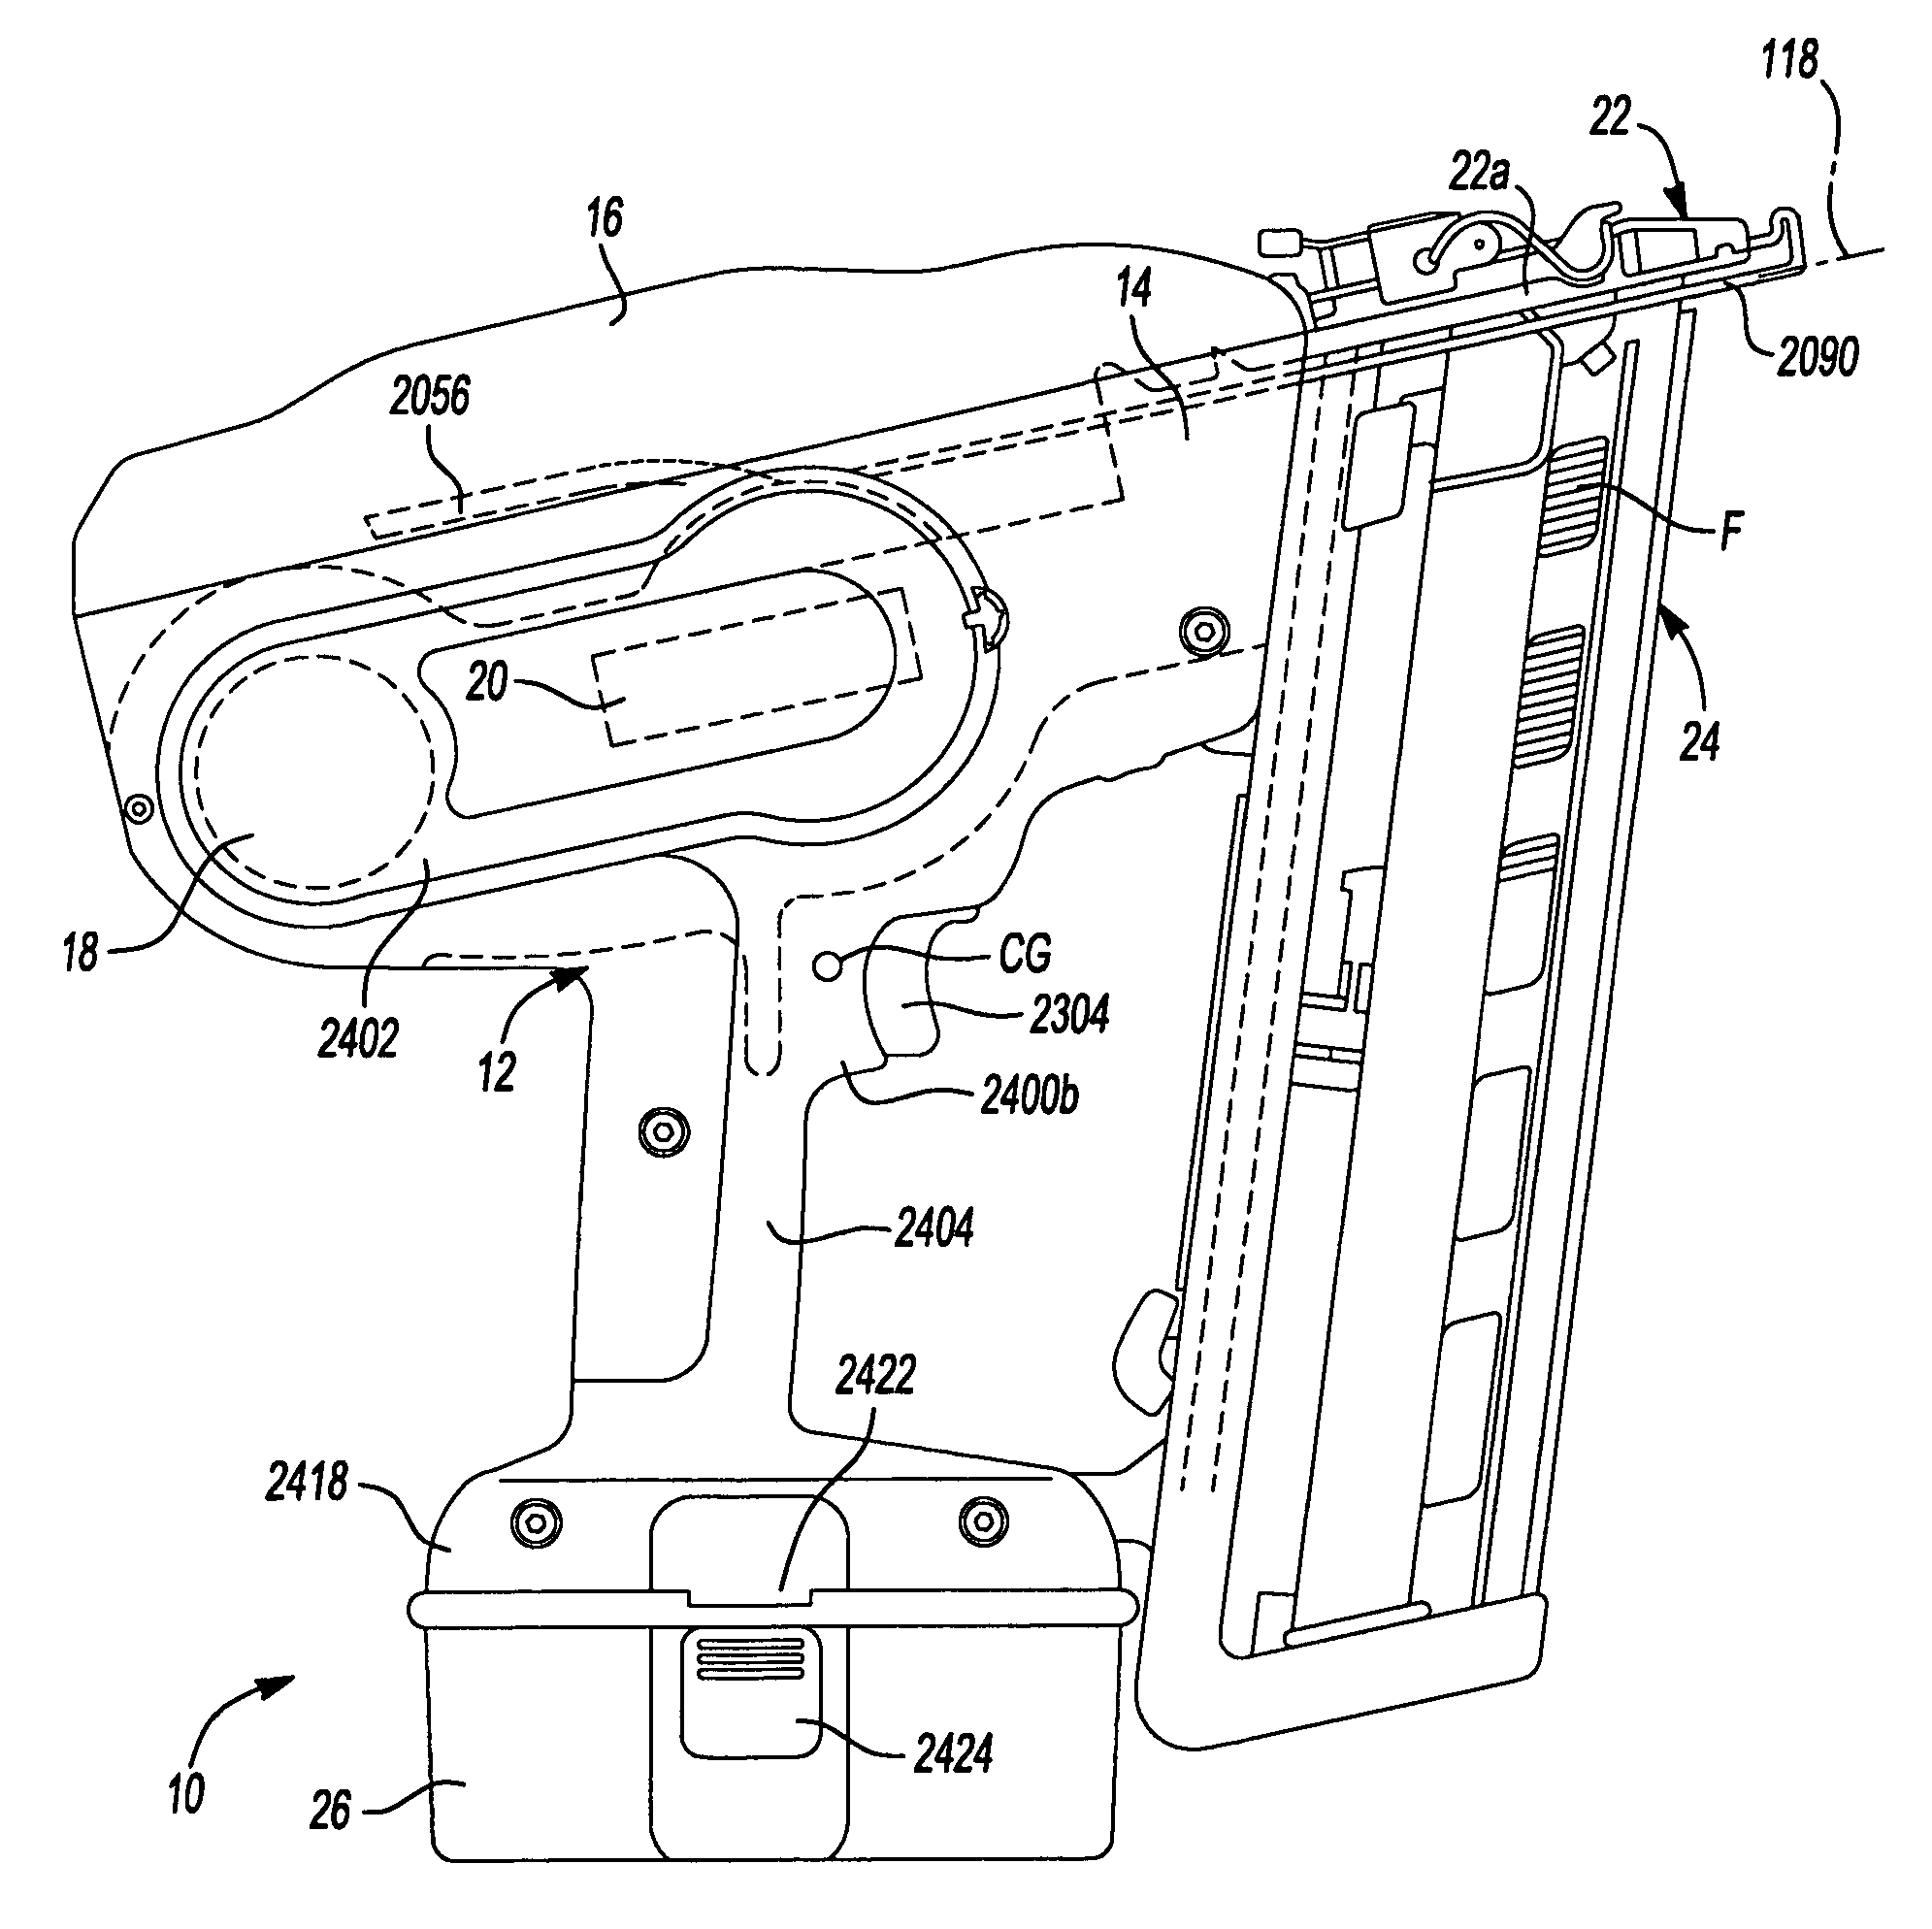 Activation arm assembly method